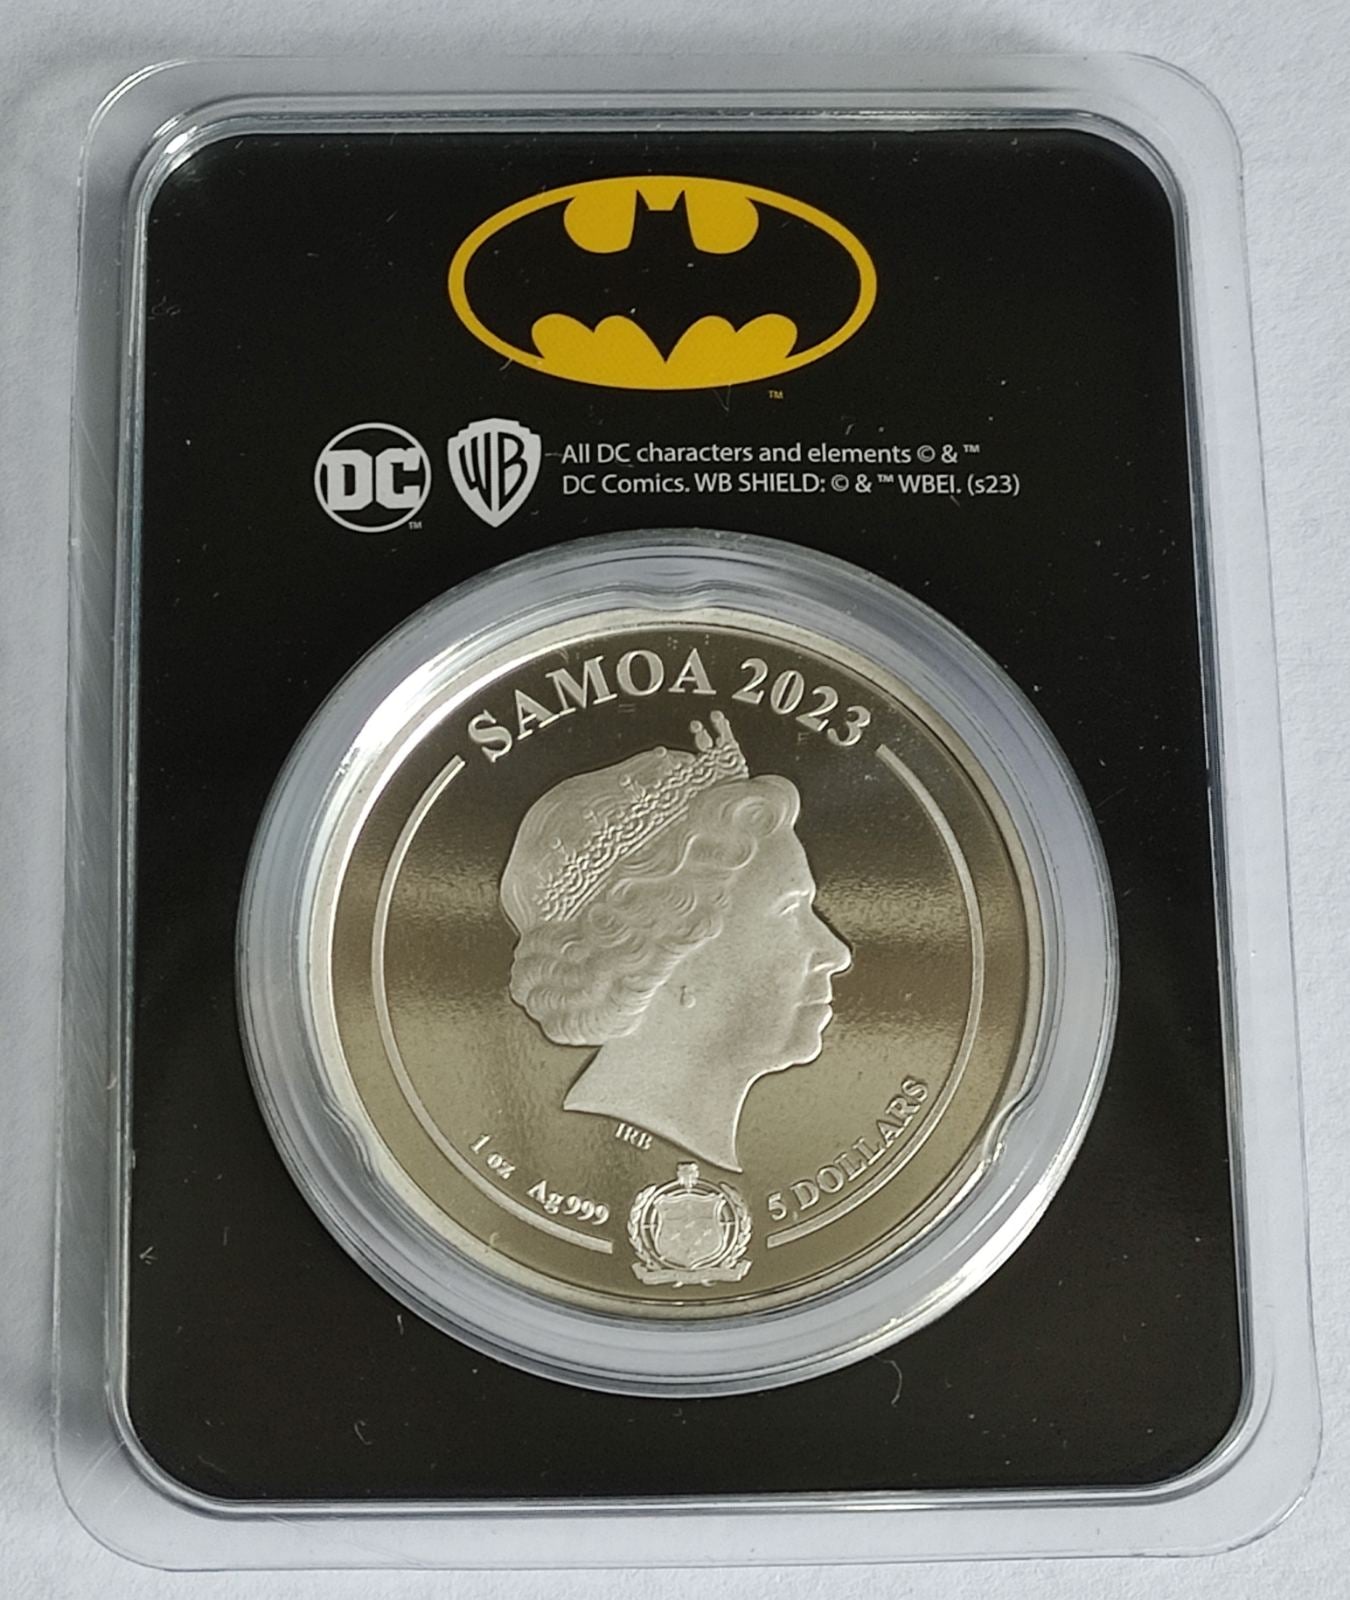 2023 Samoa DC Comics Batman 1 oz Colorized Silver Coin in Tamper-Evident Packaging